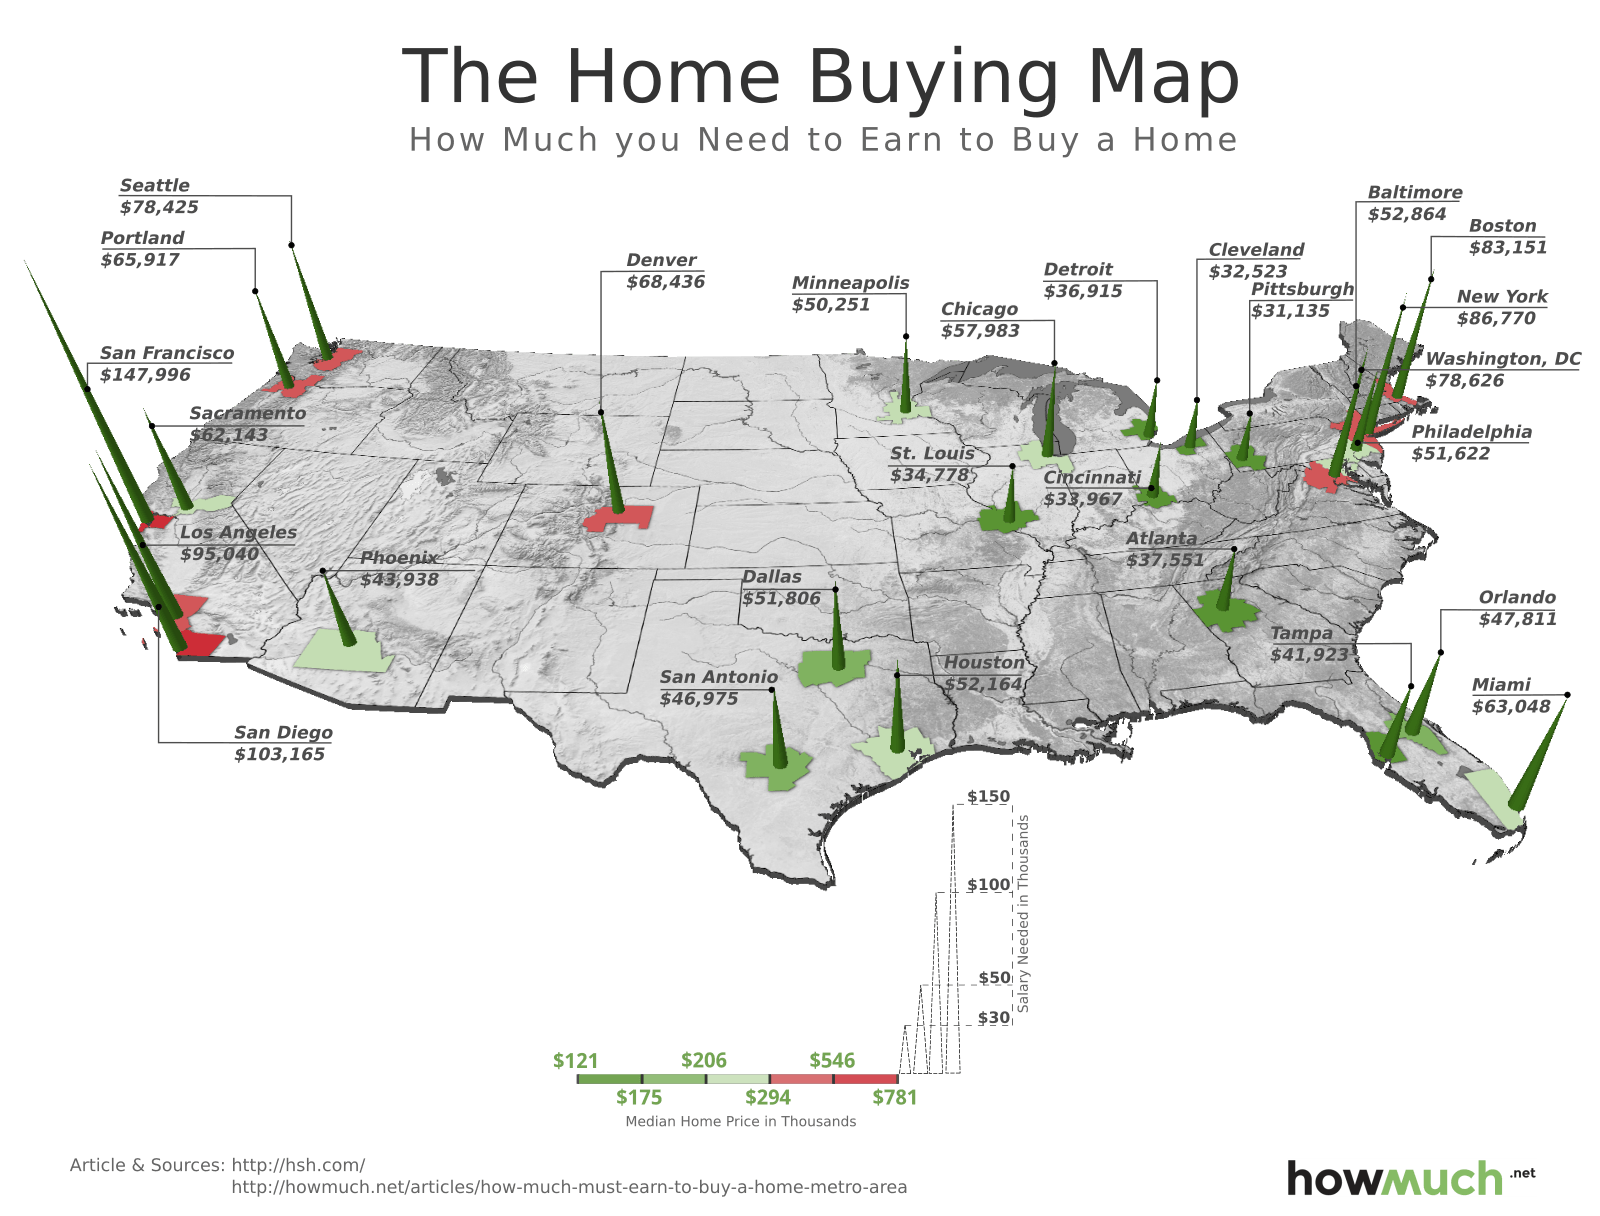 This 3D Map Shows How Much You Must Earn to Buy a Home in 27 Major U.S. Metros